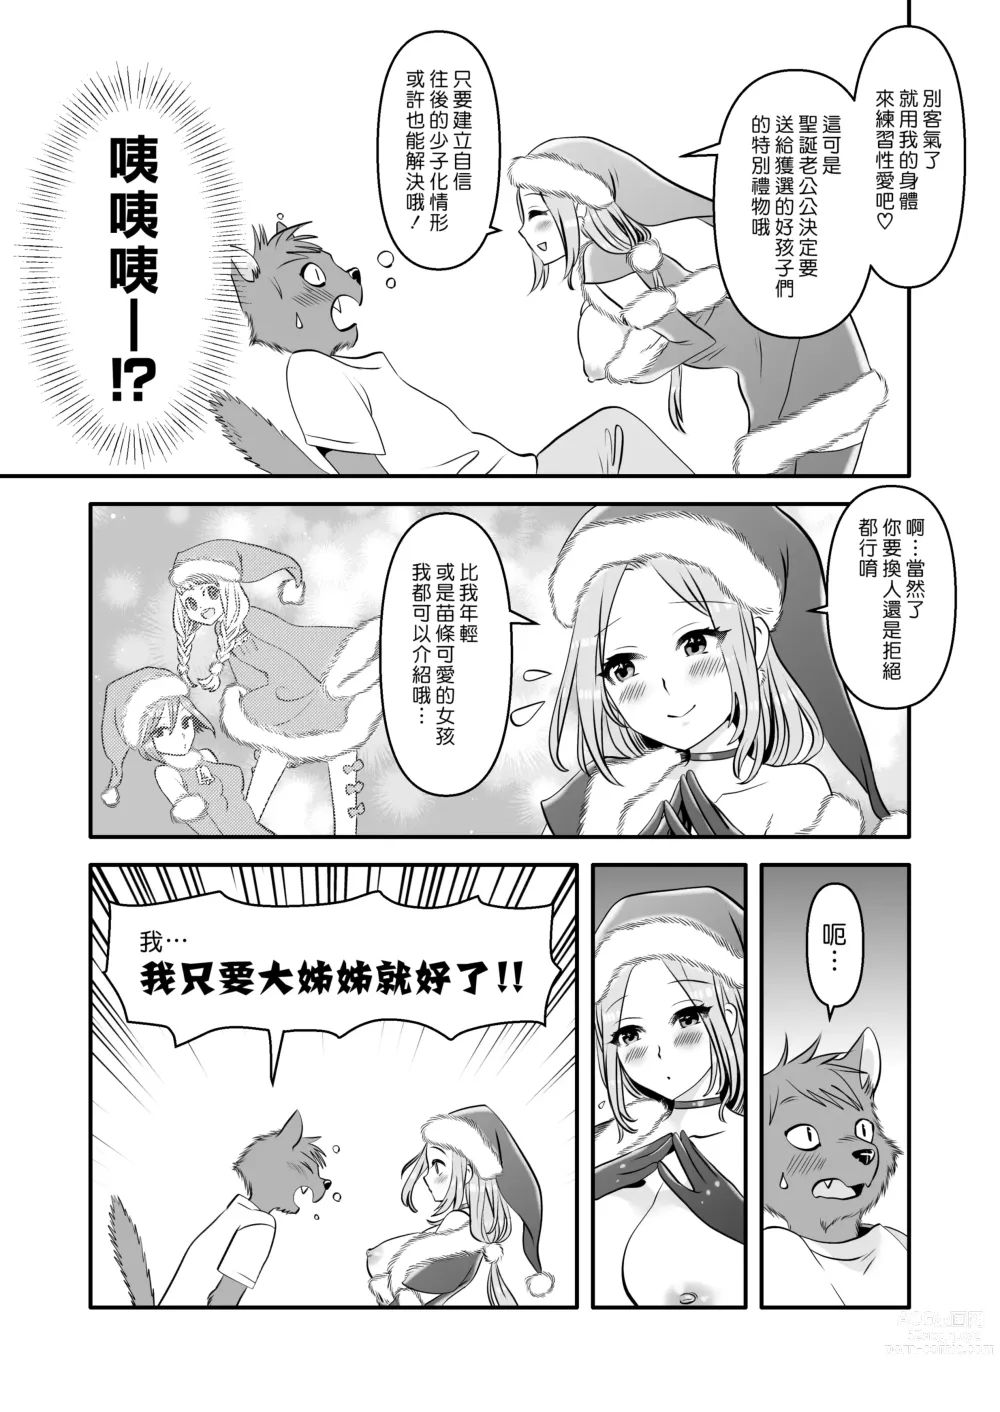 Page 8 of doujinshi 獸人君與聖誕大姊姊